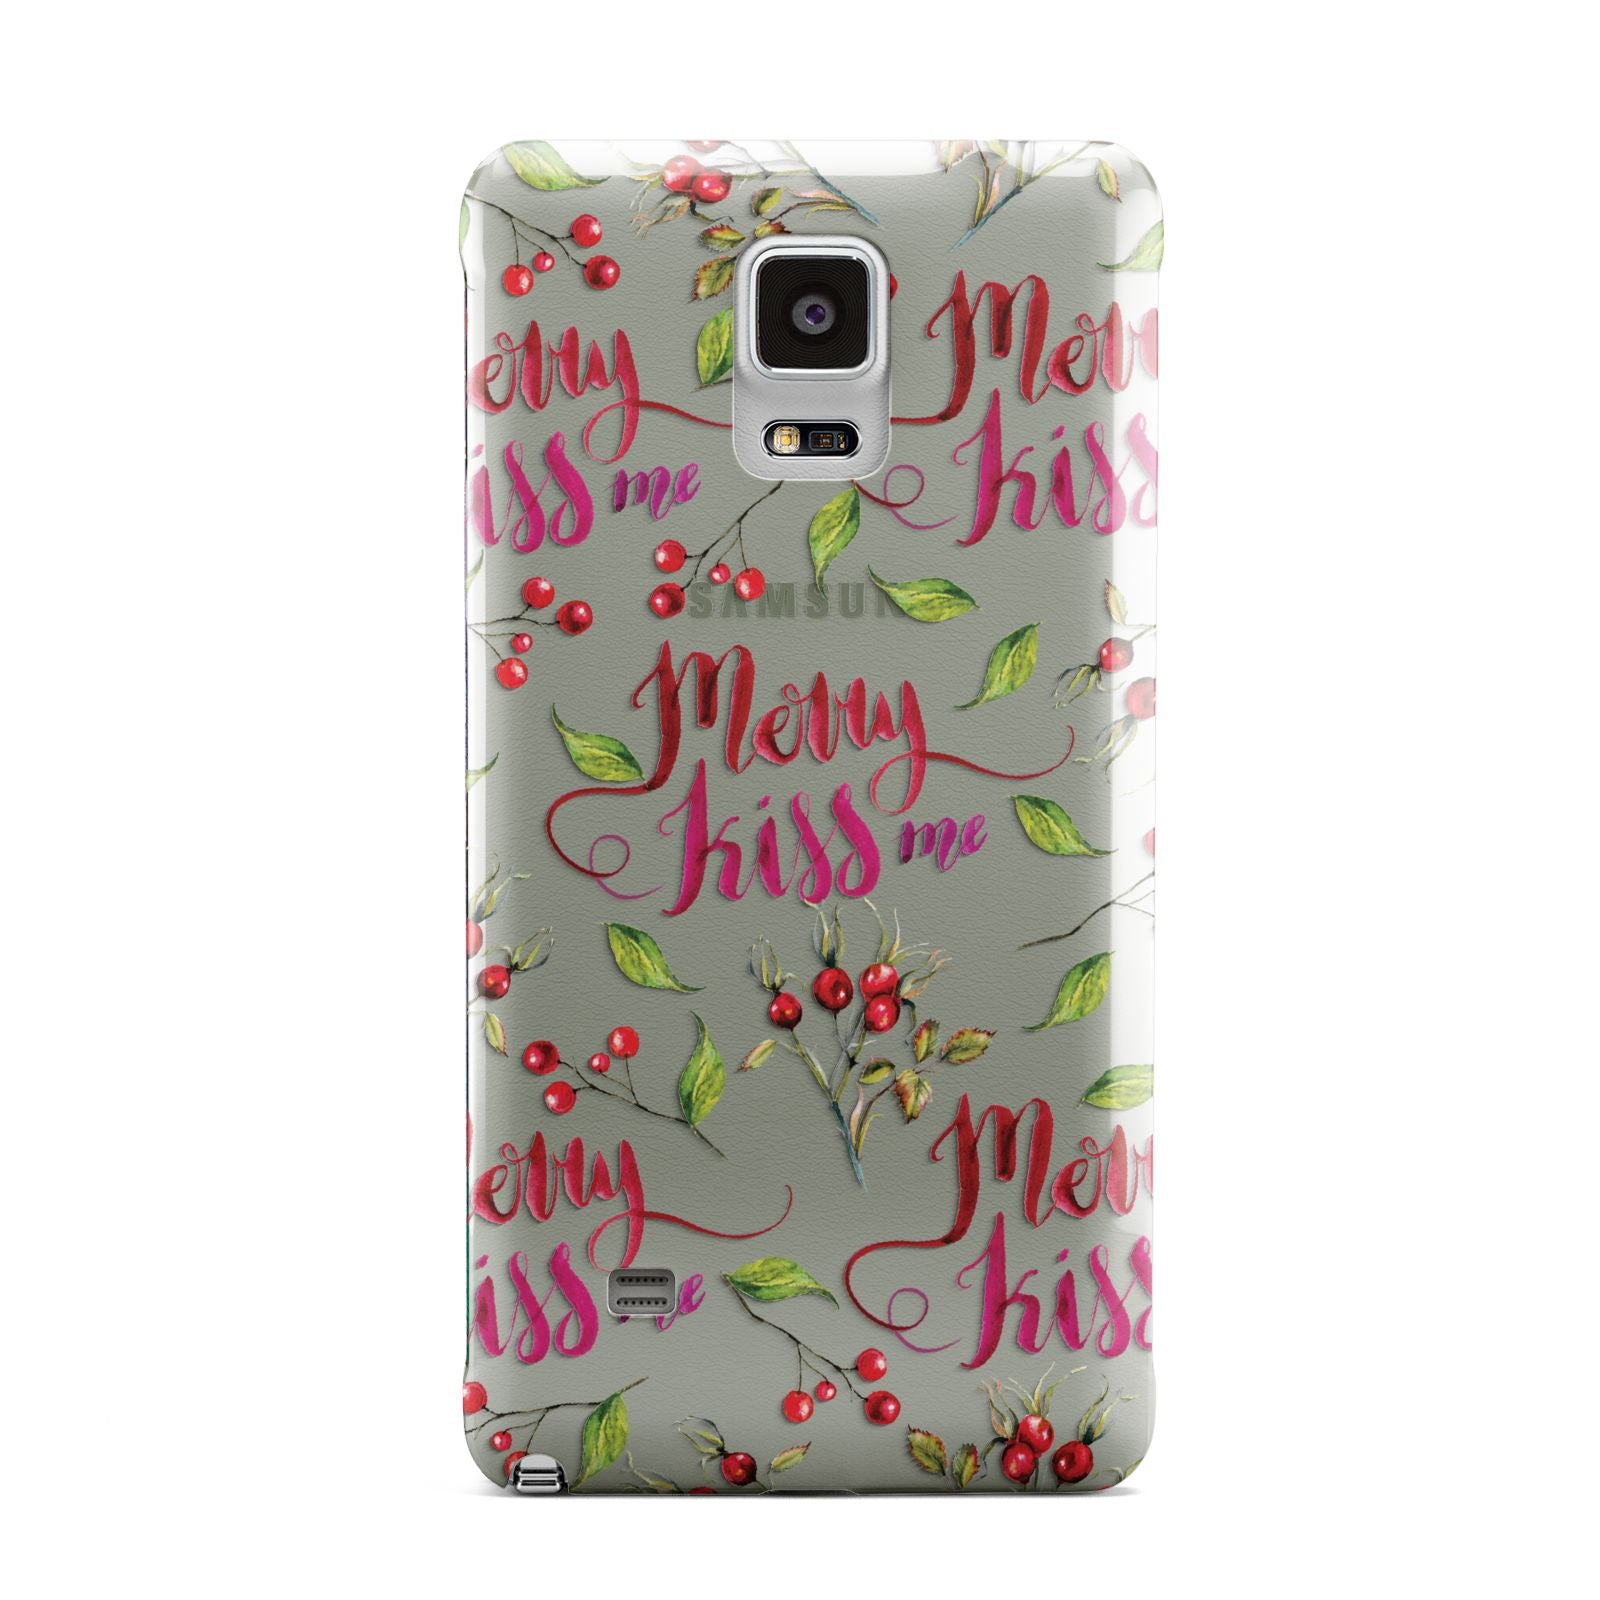 Merry kiss me Samsung Galaxy Note 4 Case